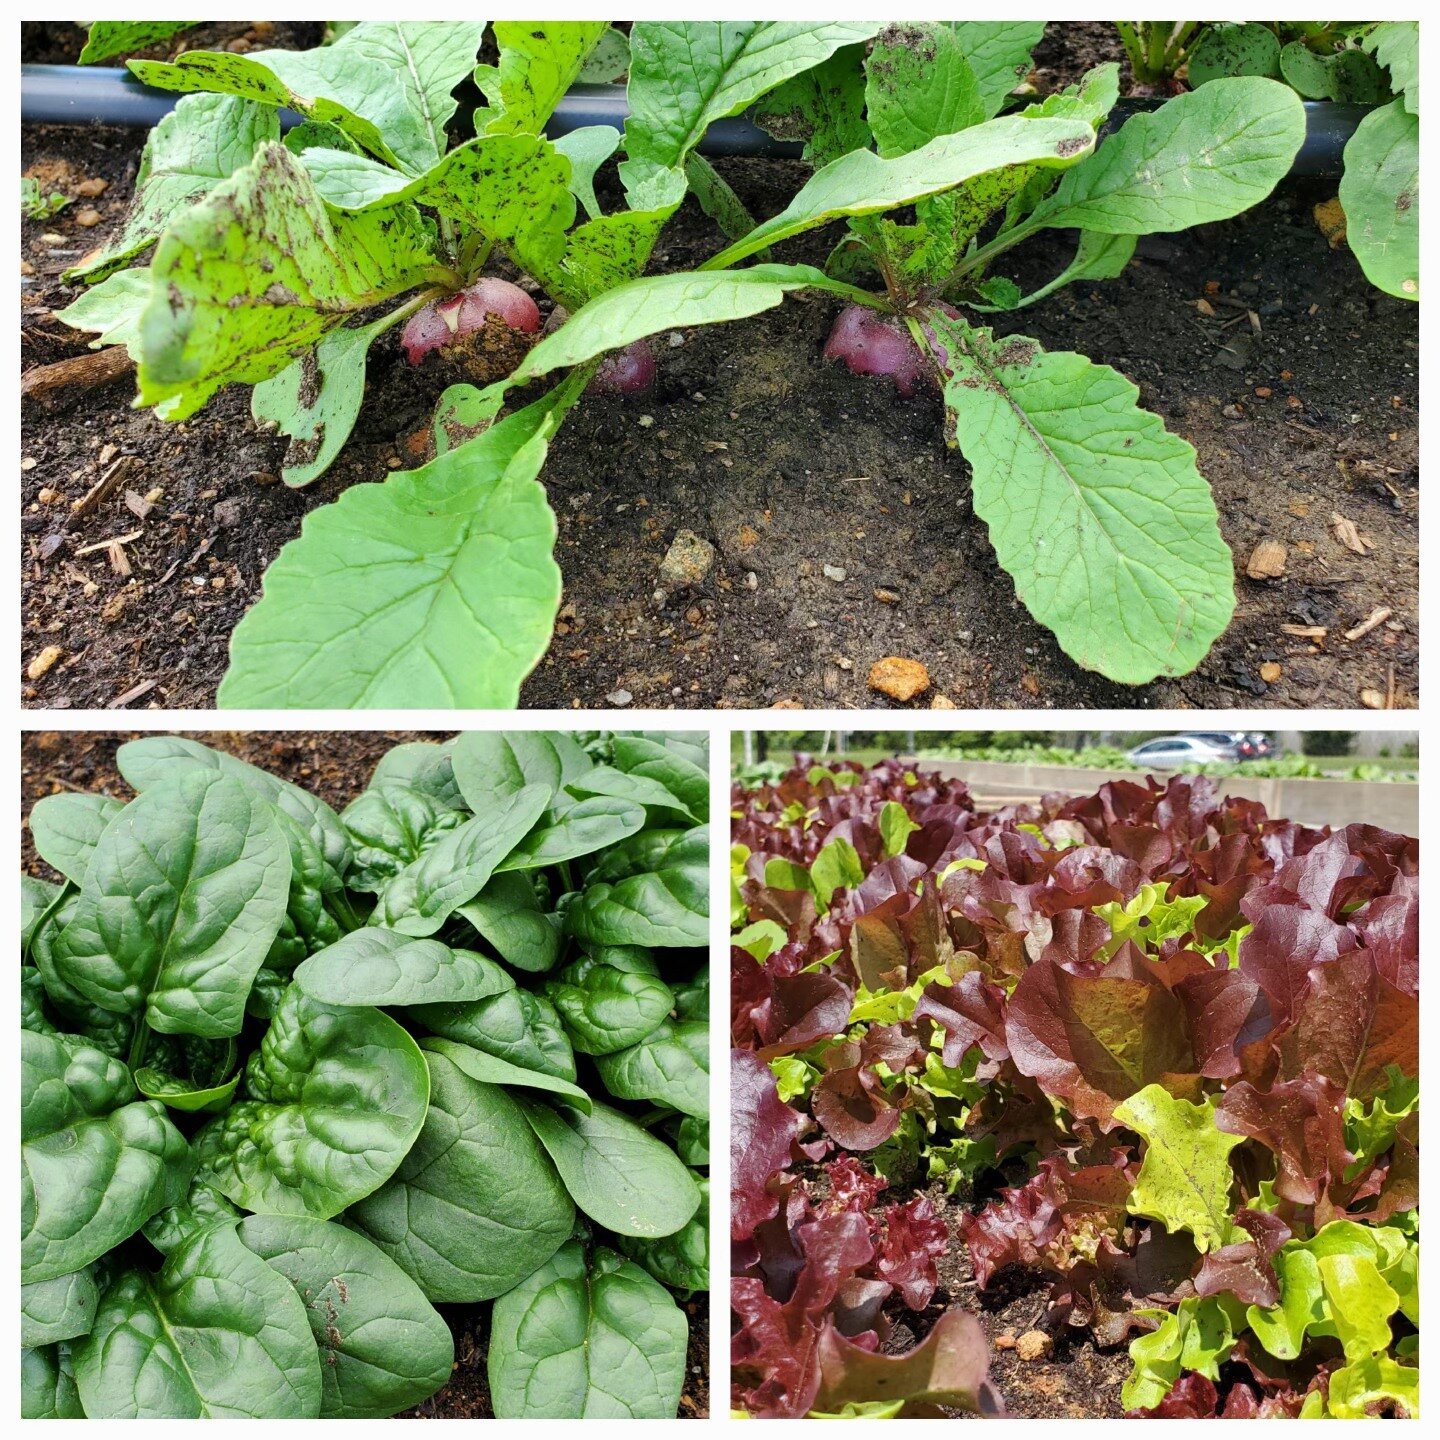 It wasn't warm and sunny but 4th graders at Lancashire Elementary School had a lot of fun harvesting the lettuce, spinach, rainbow chard and radishes from their school garden!  Each class that came out was on the hunt for the largest radish!  The ent